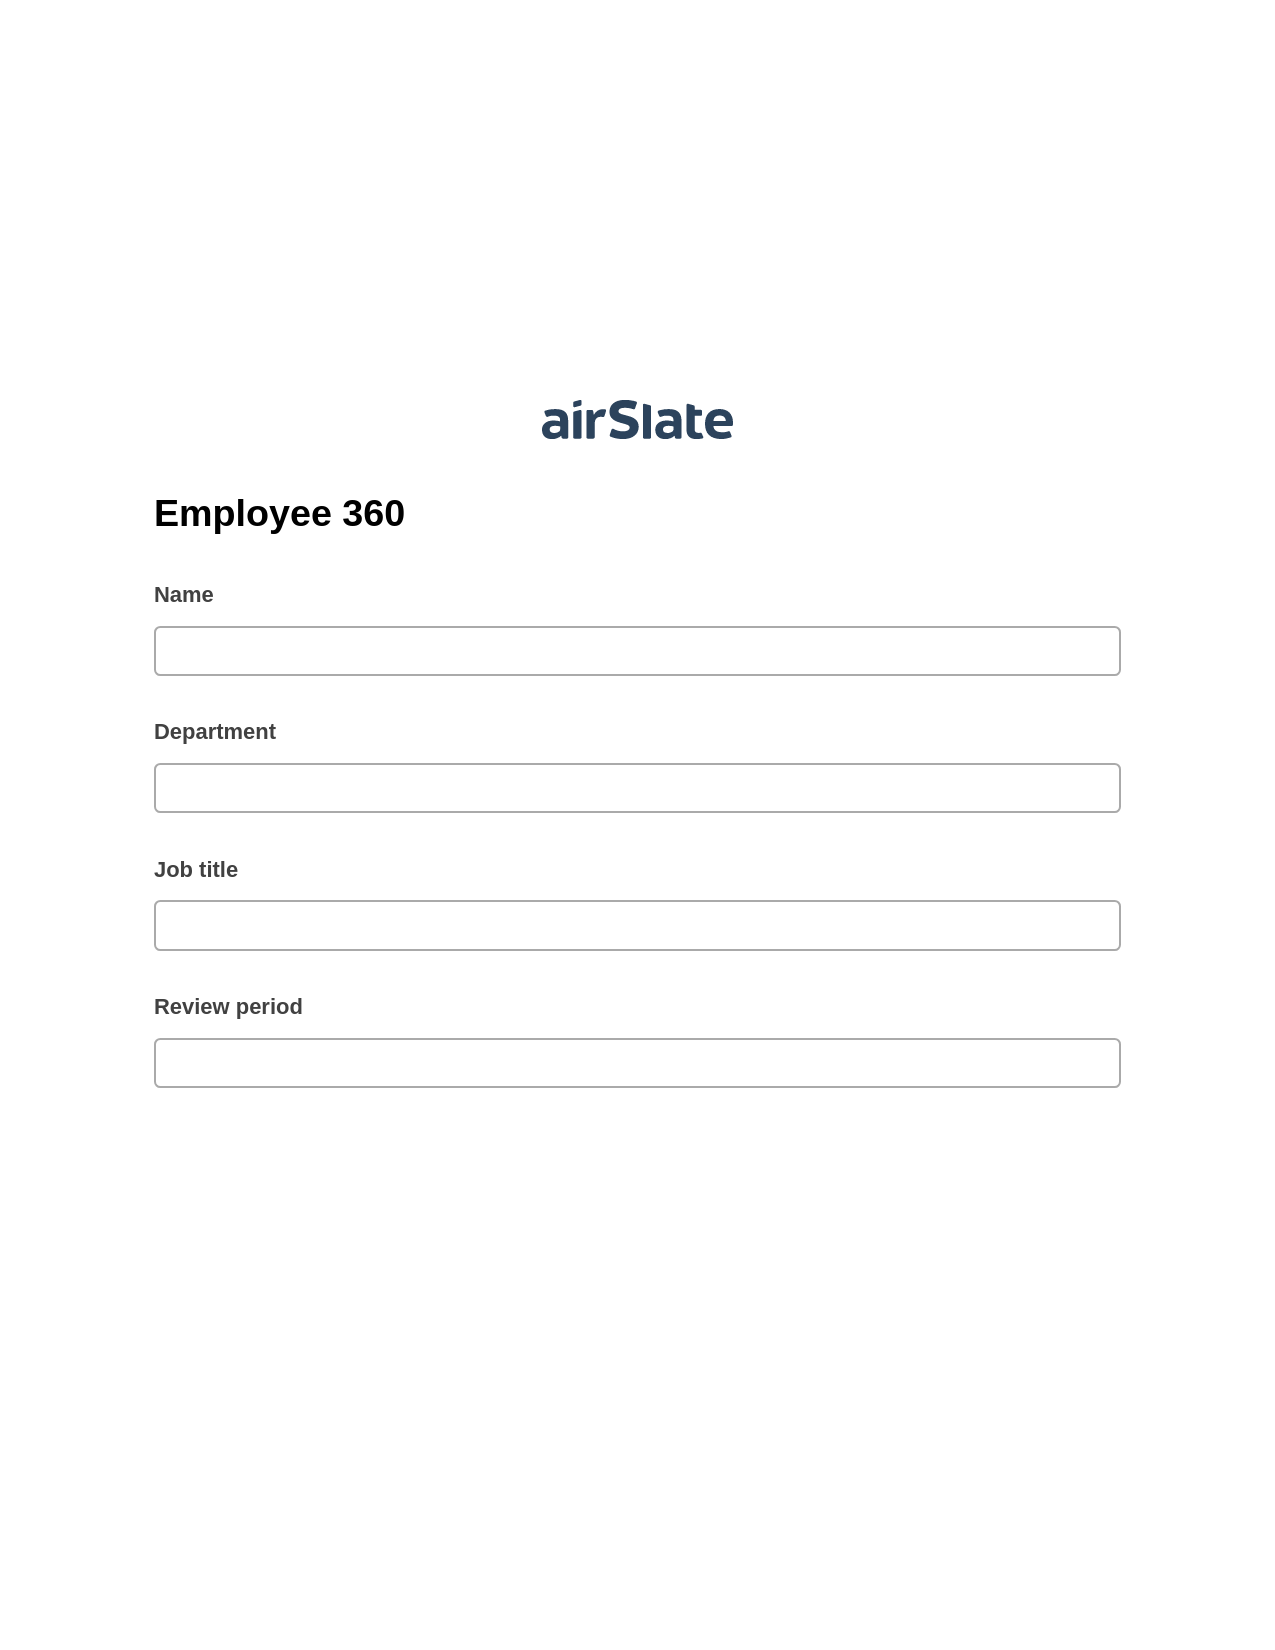 Employee 360 Pre-fill from Salesforce Records Bot, Update MS Dynamics 365 Record Bot, Archive to SharePoint Folder Bot